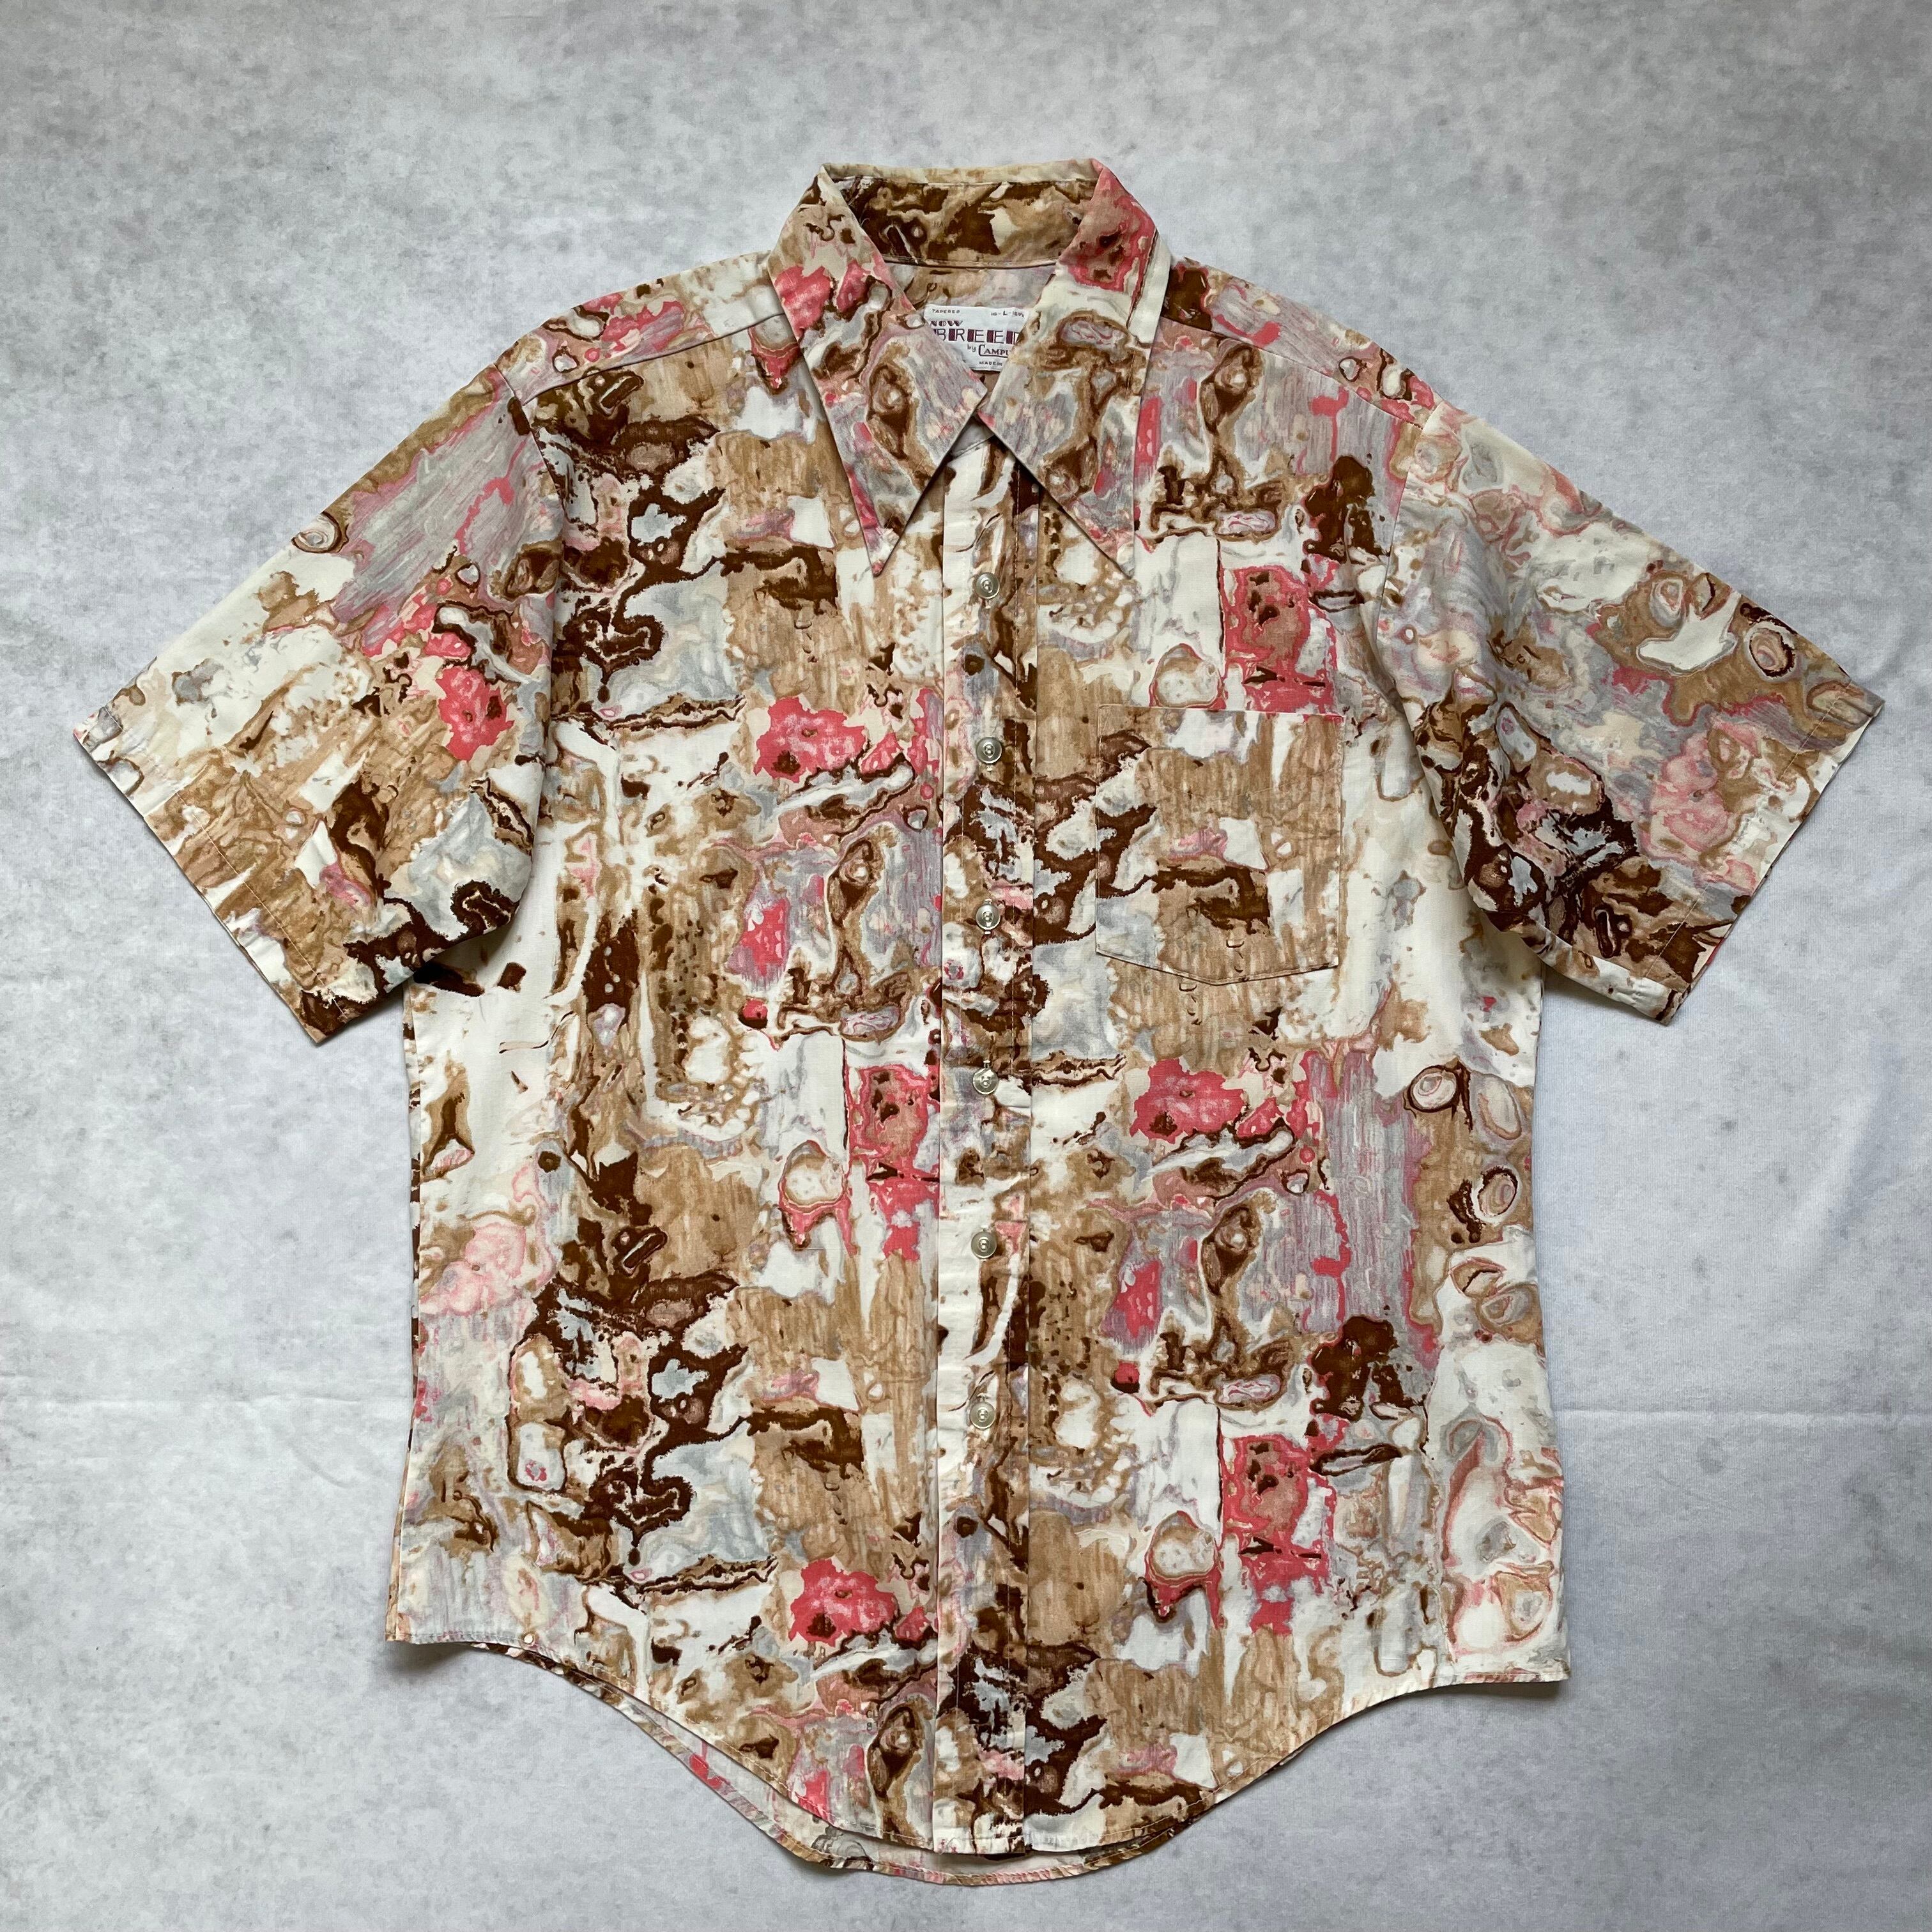 70s NOW BREED by CAMPUS S/S patterned shirt | 0 0 2